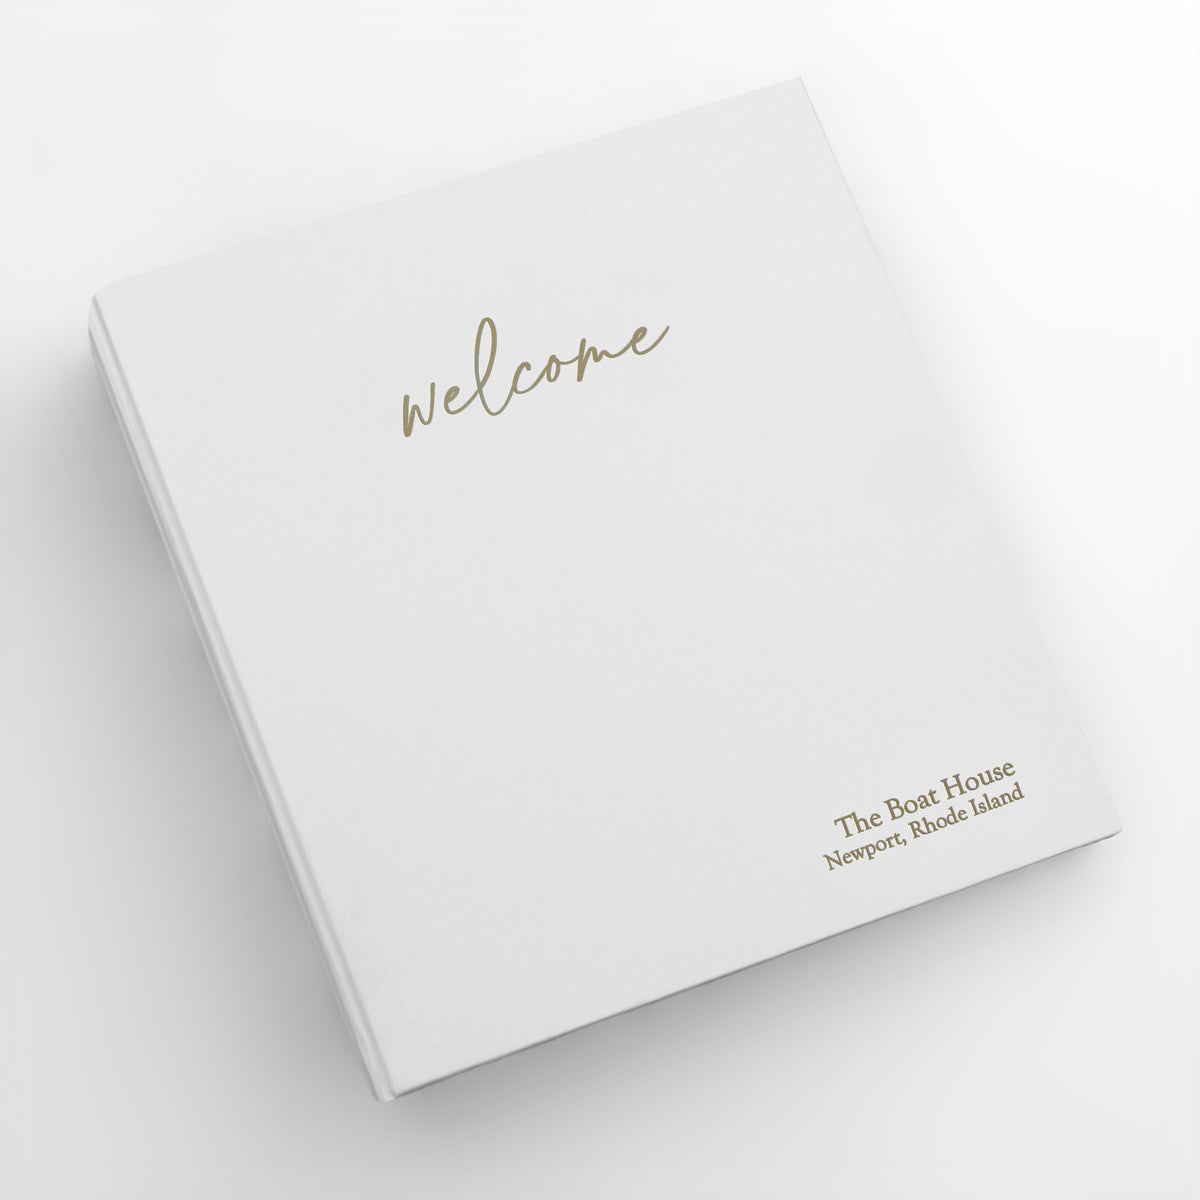 Welcome Binder with White Vegan Leather | Home | Air BNB